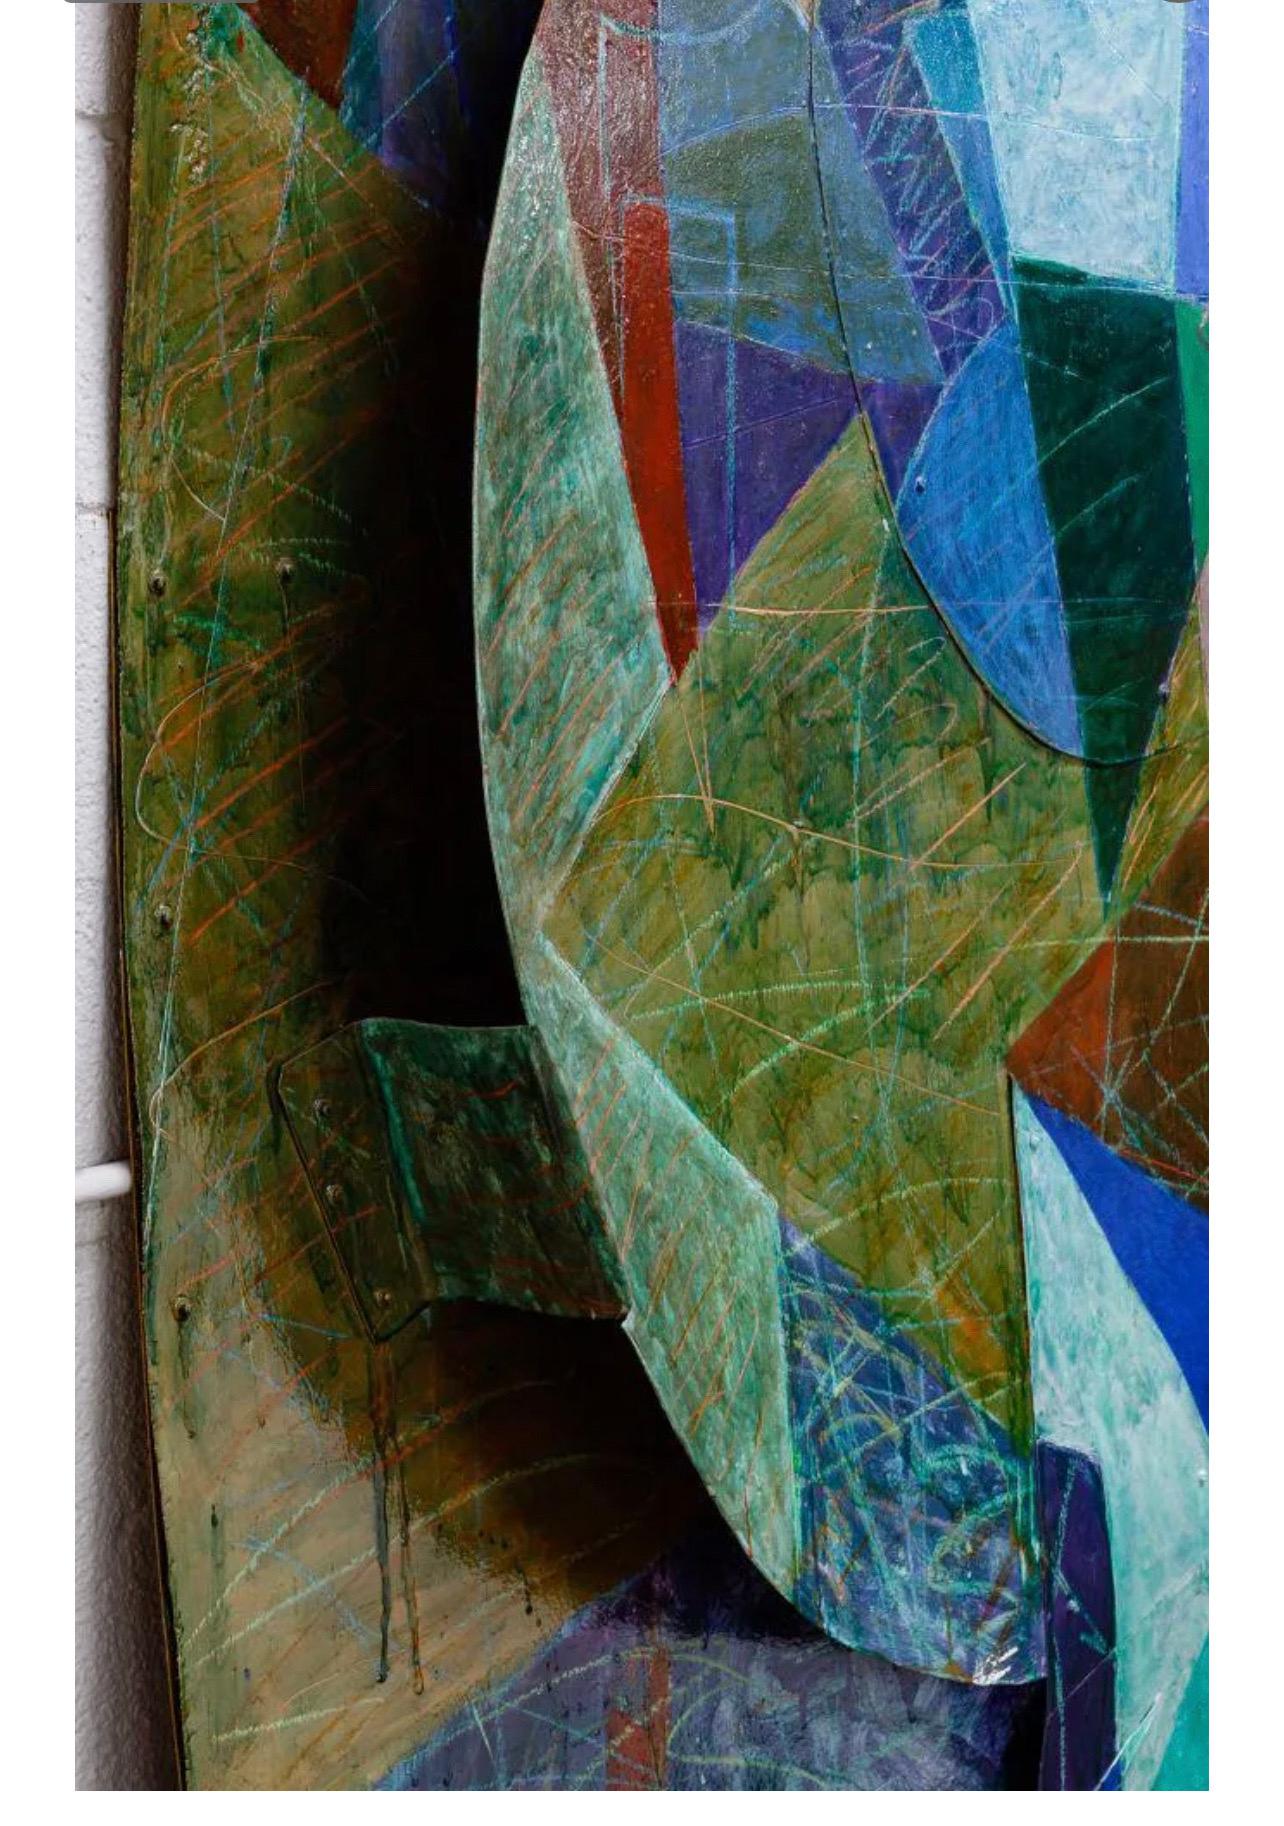 Fyon 1986 Very Large Constructed Mixed Media Painting Wall Sculpture Tom Holland 1